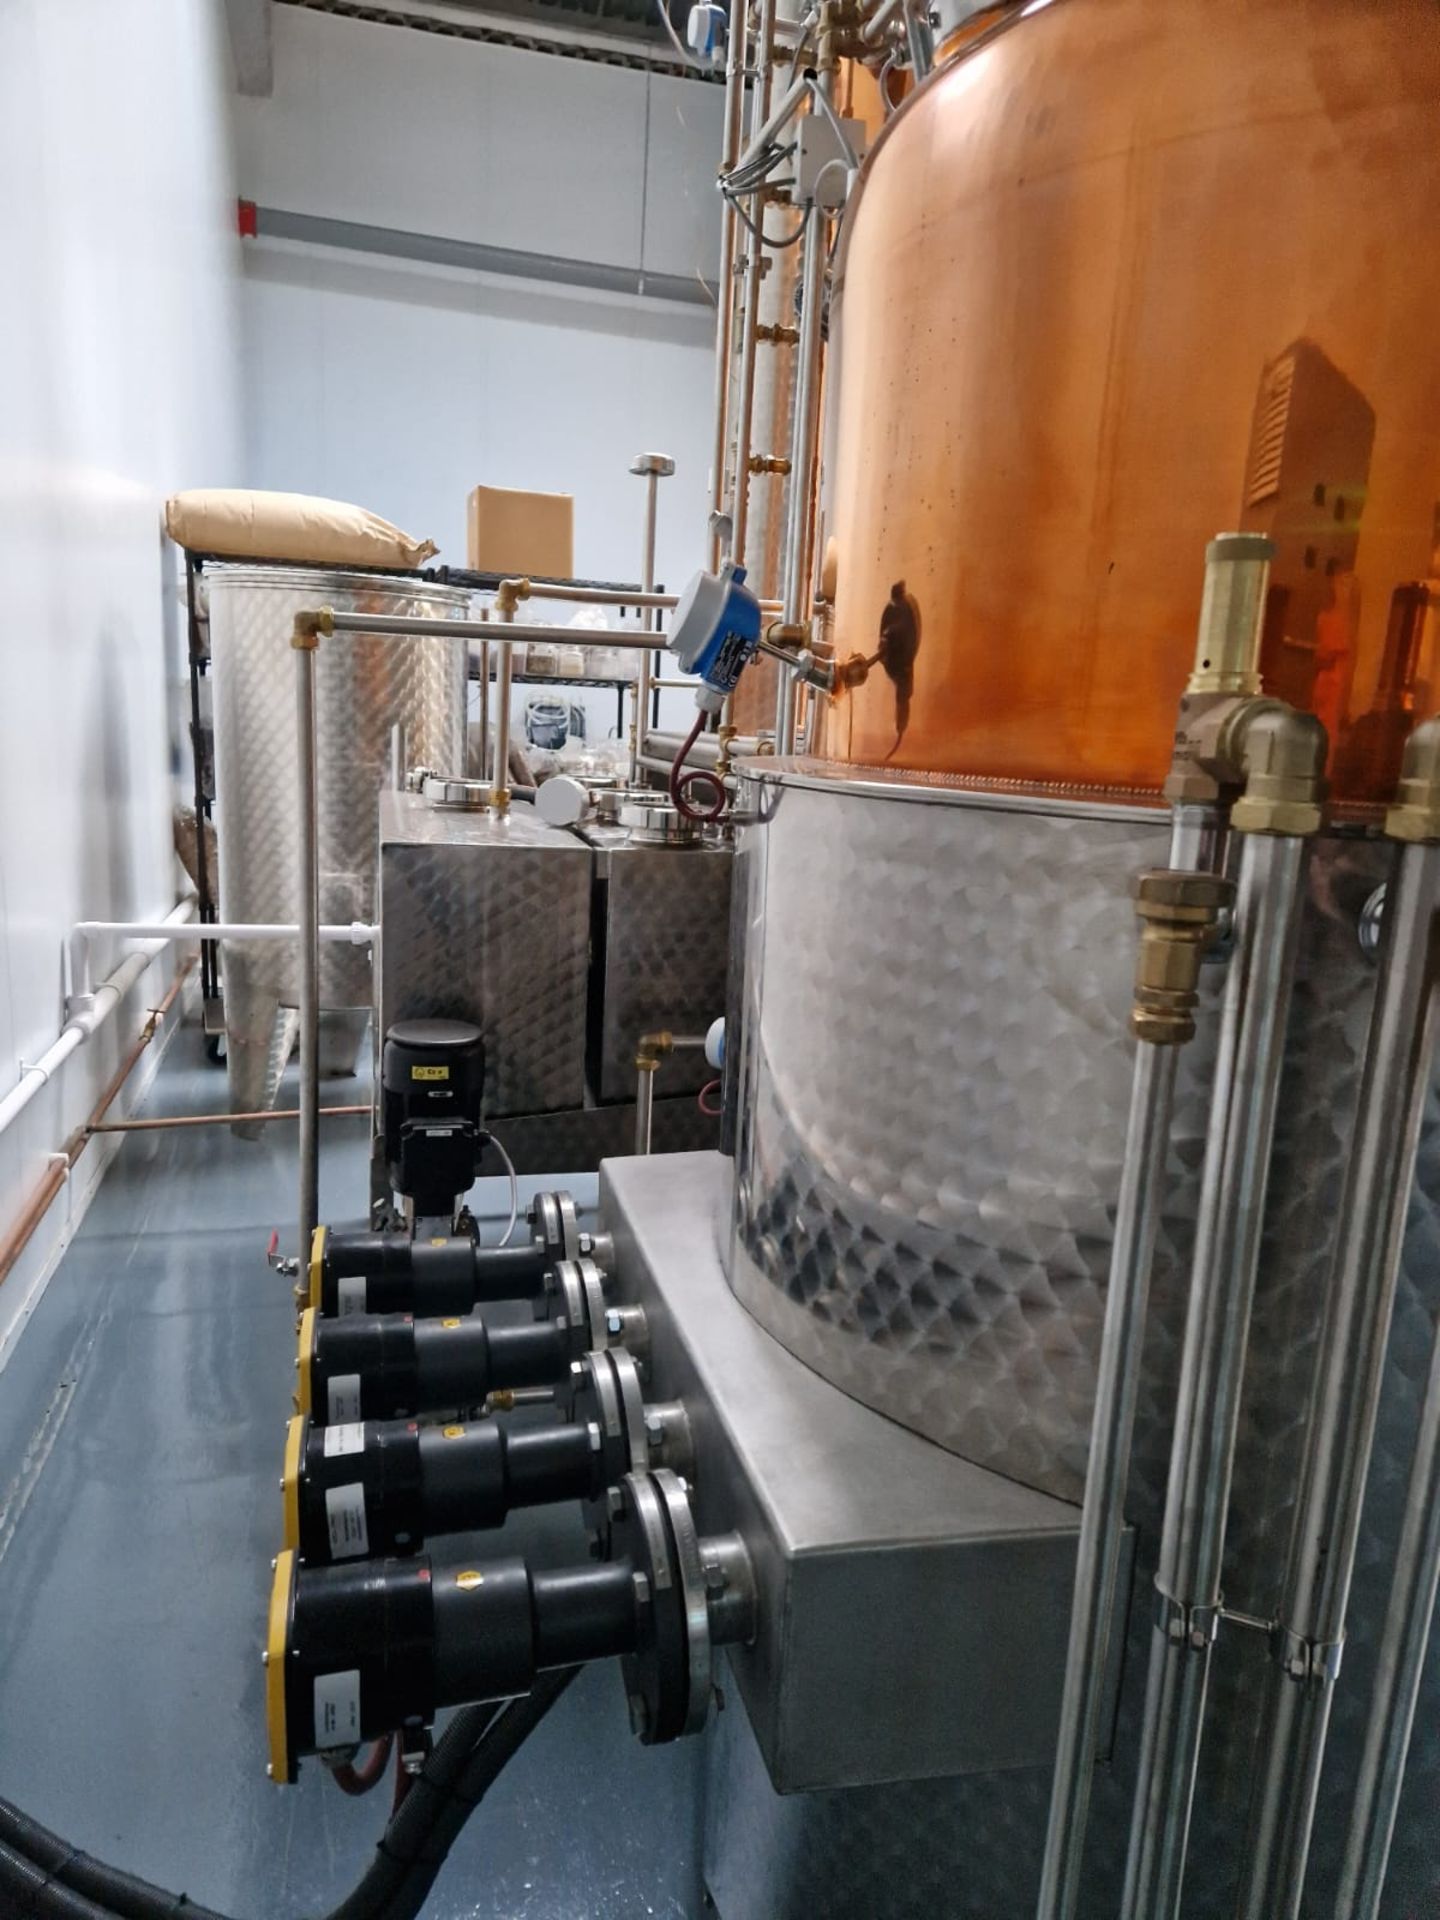 Arnold Holstein SH1000, 450L Pot Still. Installed and commissioned March 2022 - Image 3 of 9